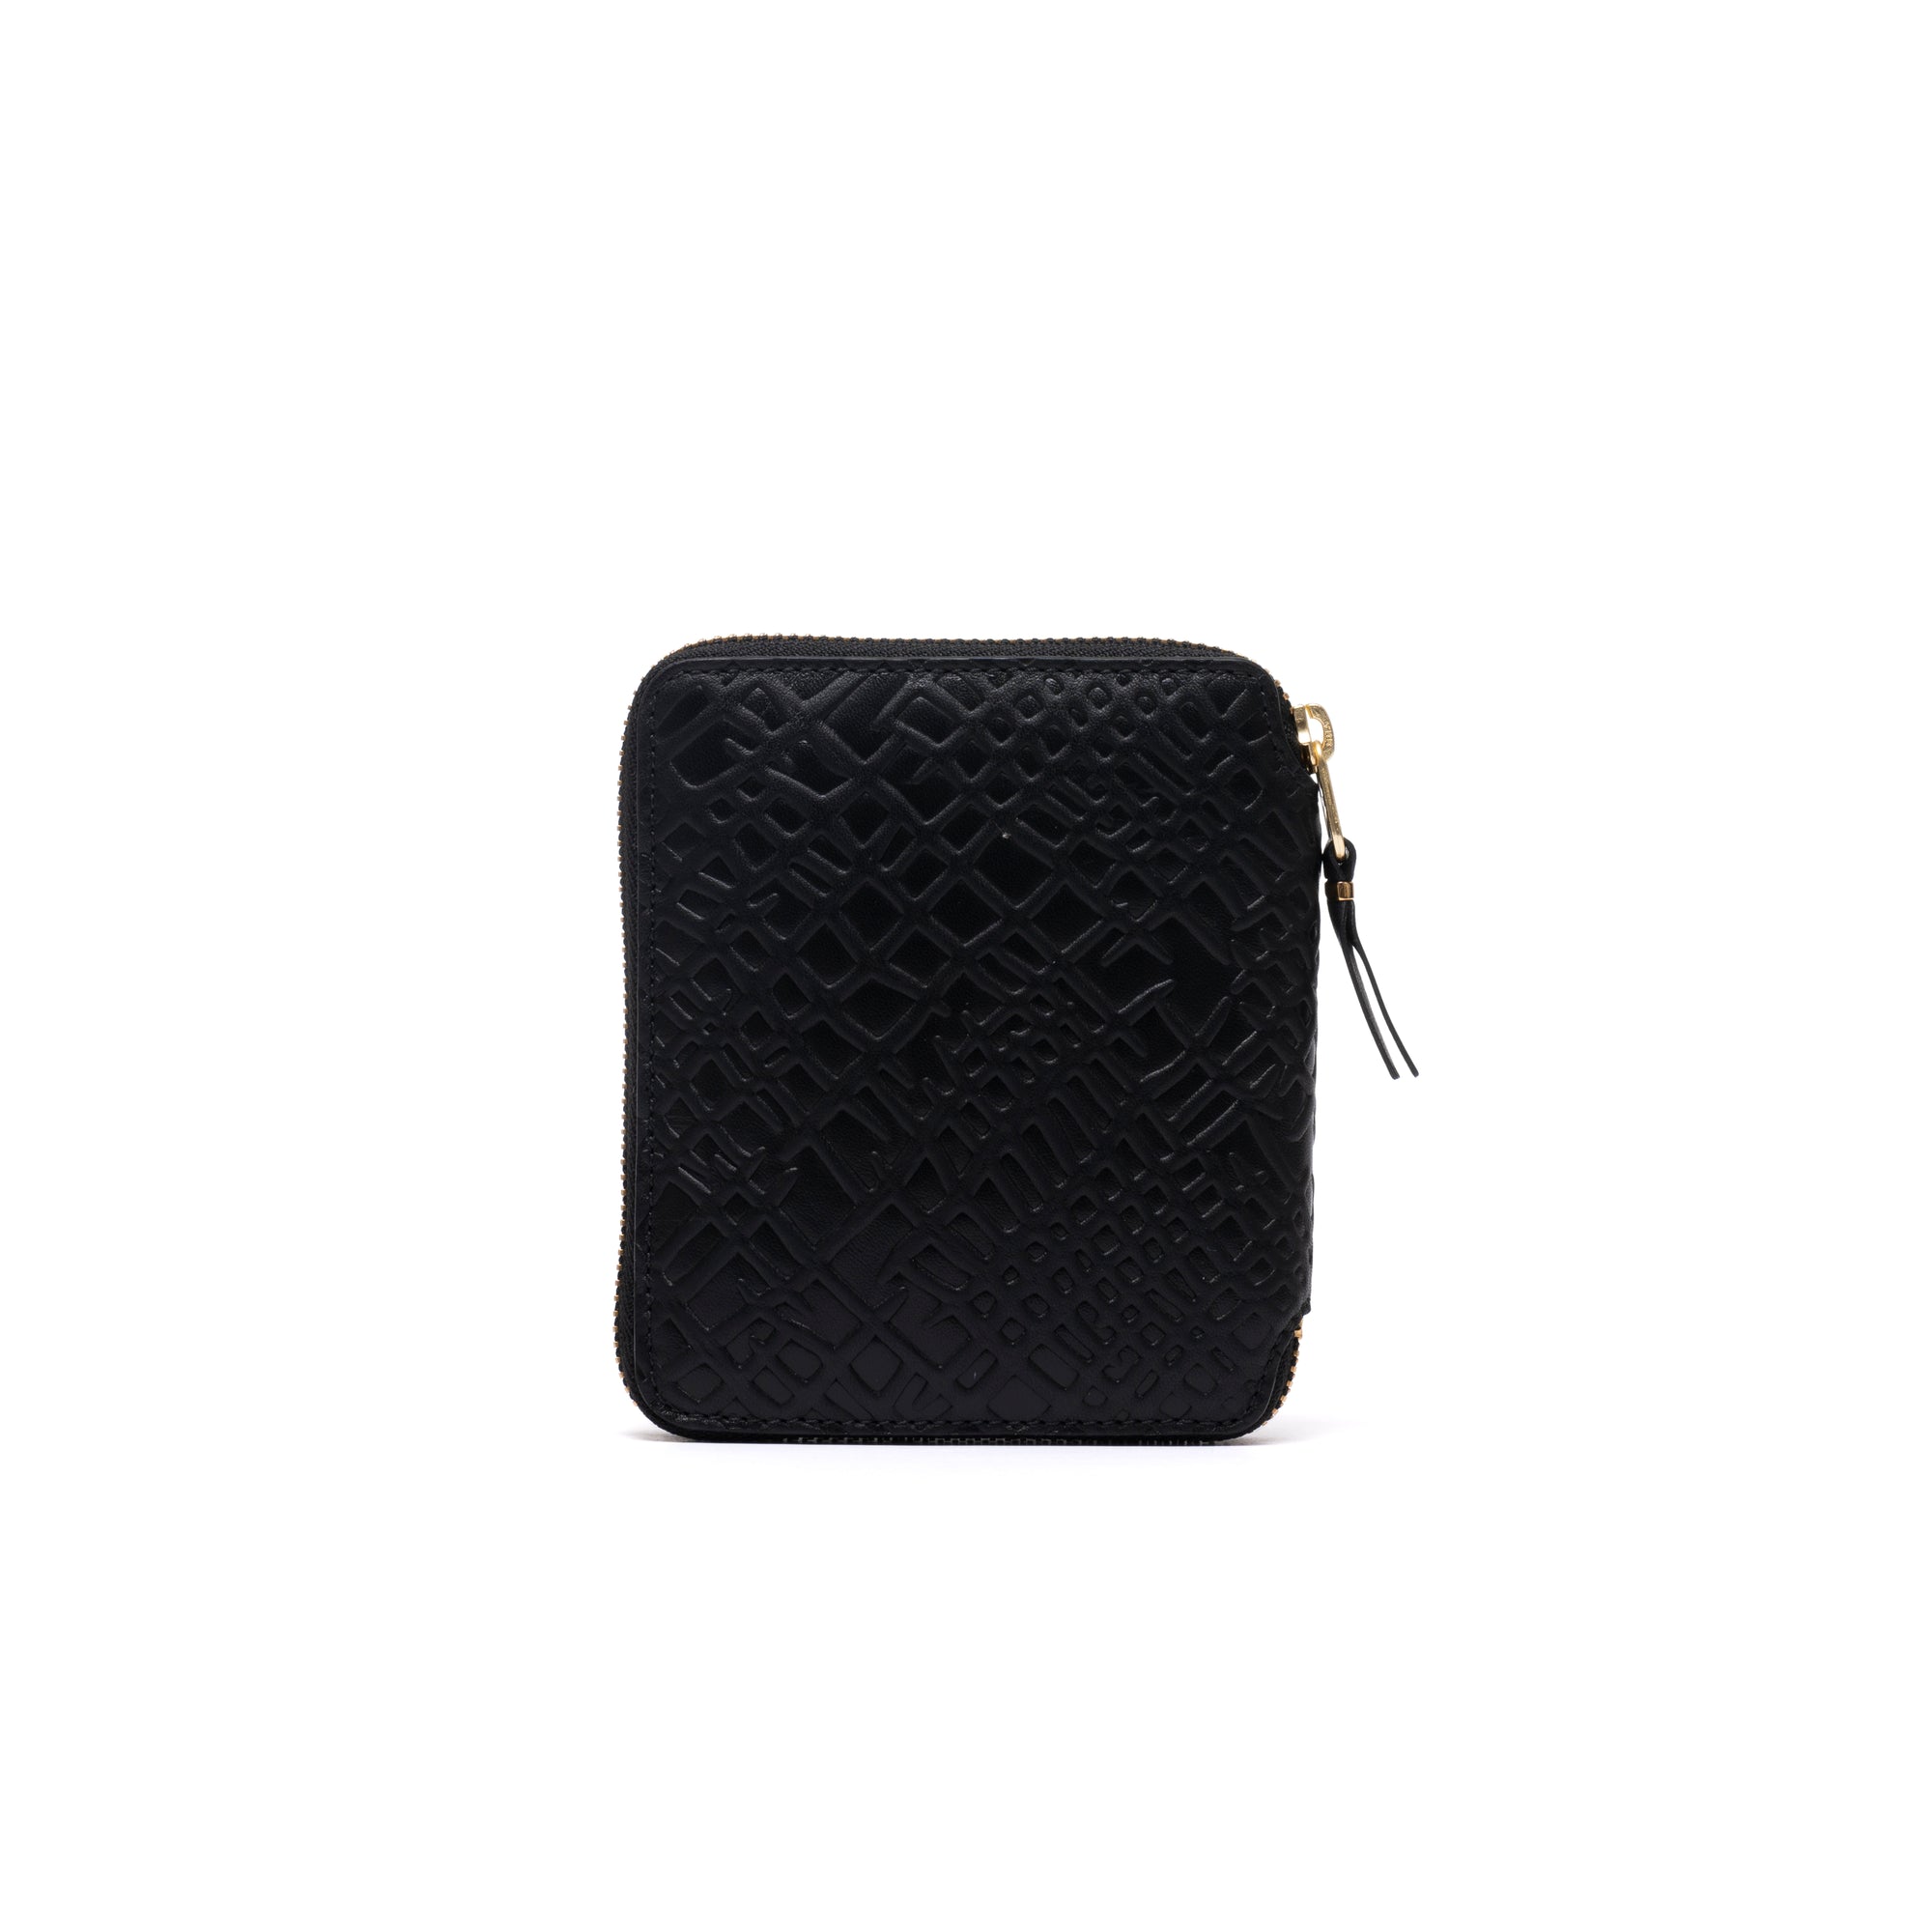 CDG WALLET - Embossed Roots - (SA2100ER Black) view 2